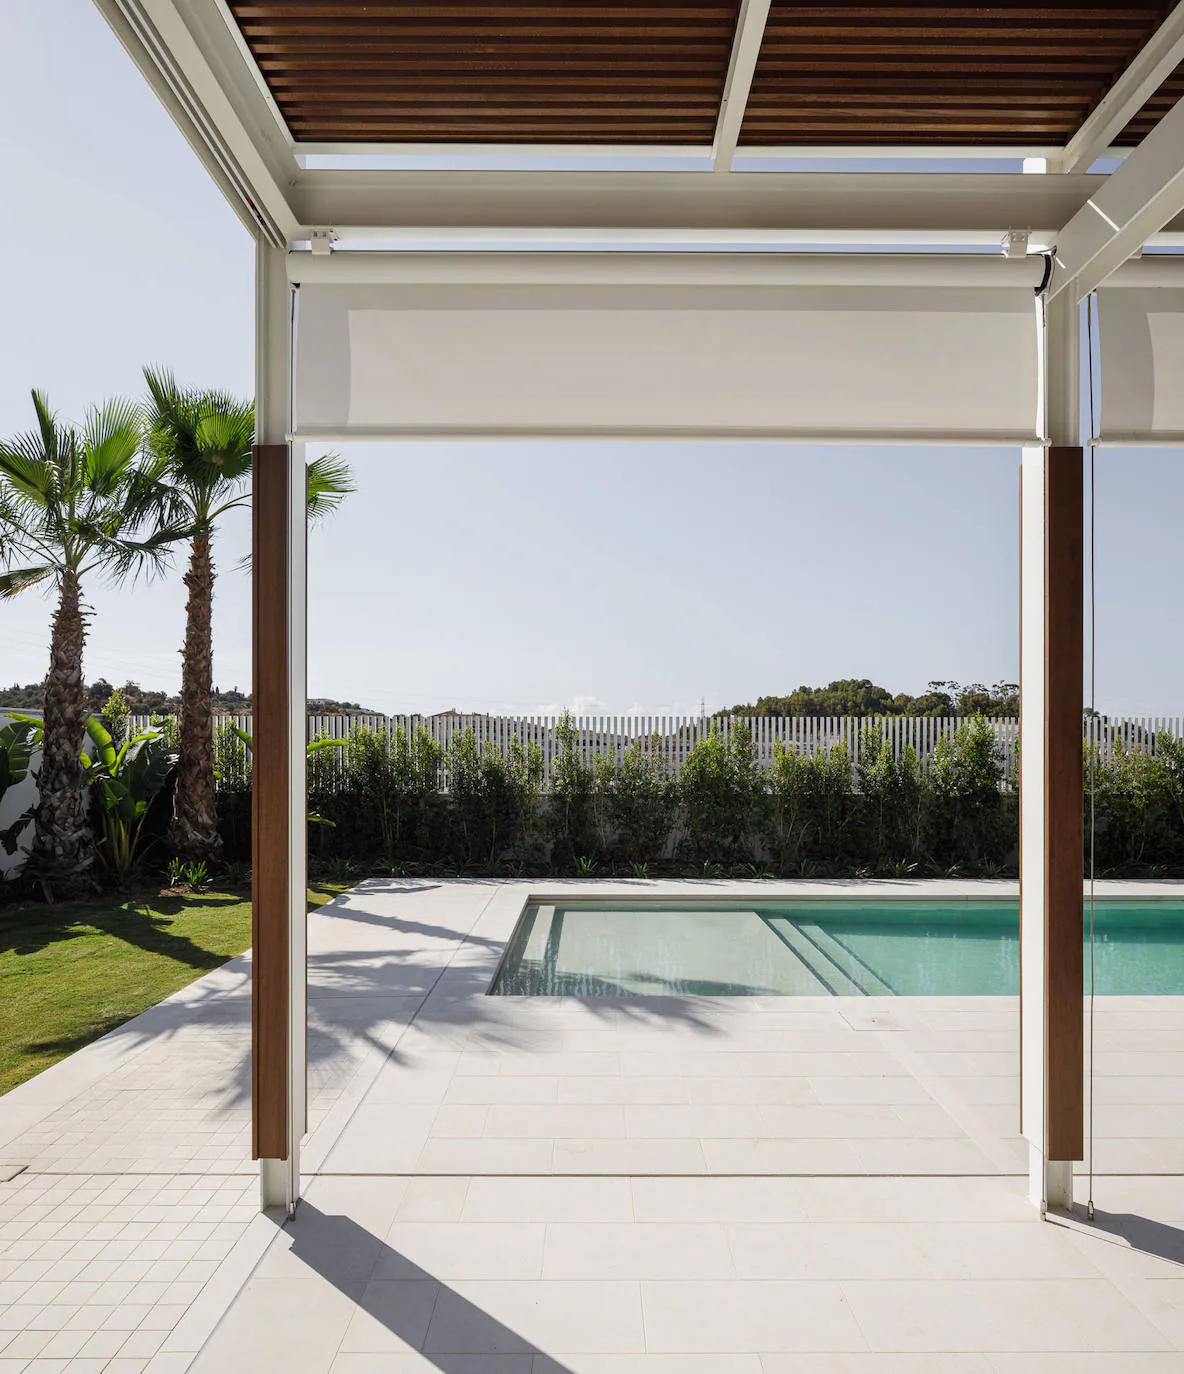 Imagen secundaria 2 - In pictures, Malaga house makes it onto list of the 50 best designed in Spain and Latin America